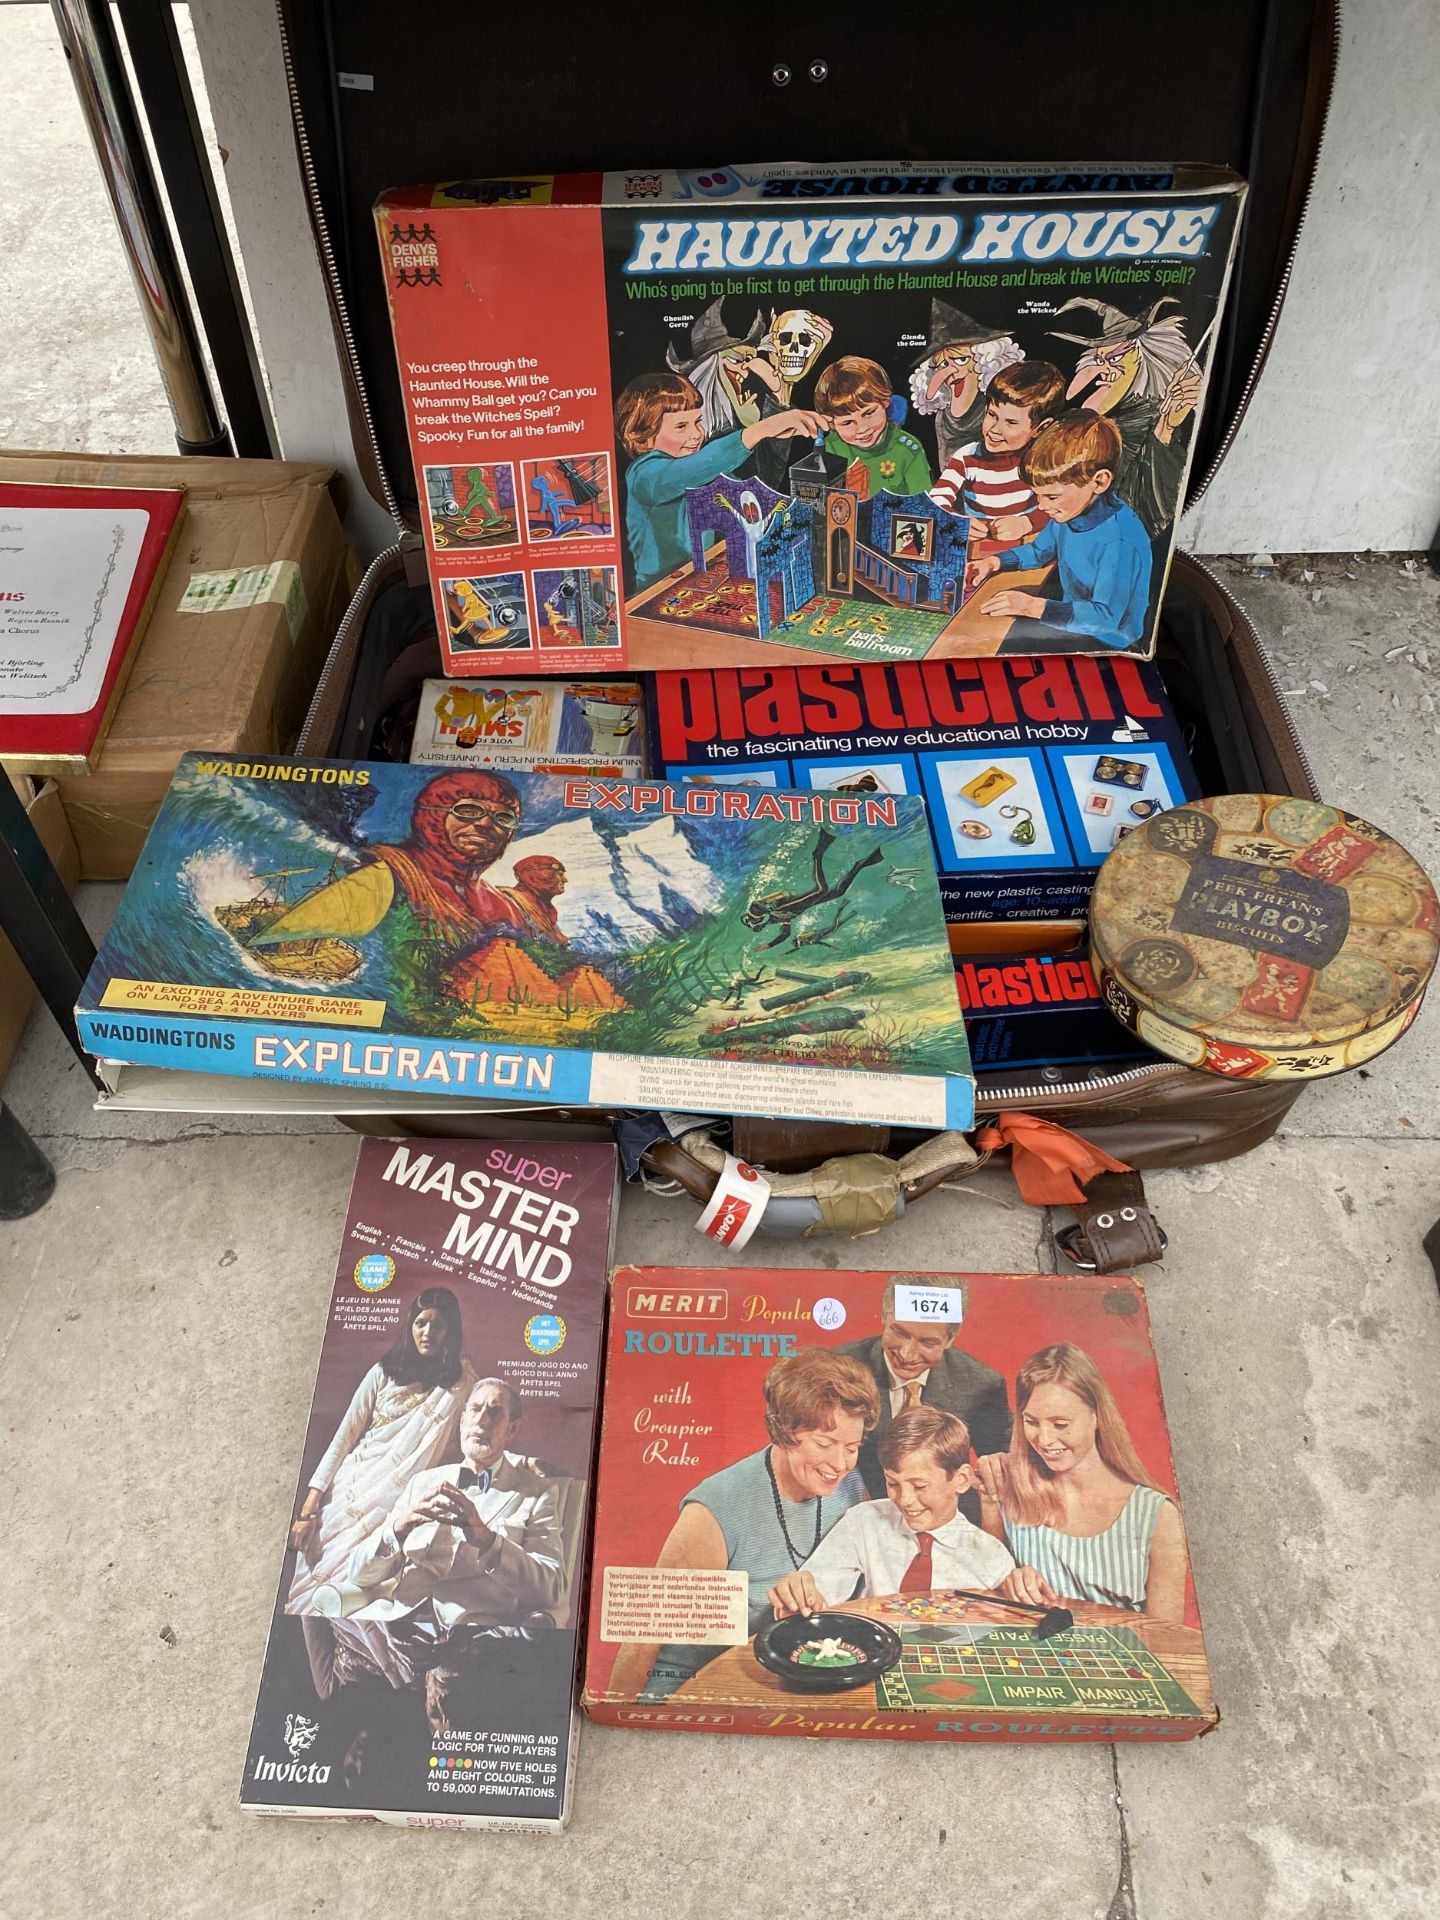 AN ASSORTMENT OF VINTAGE AND RETRO BOARD GAMES TO INCLUDE HAUNTED HOUSE AND EXPLORATION ETC